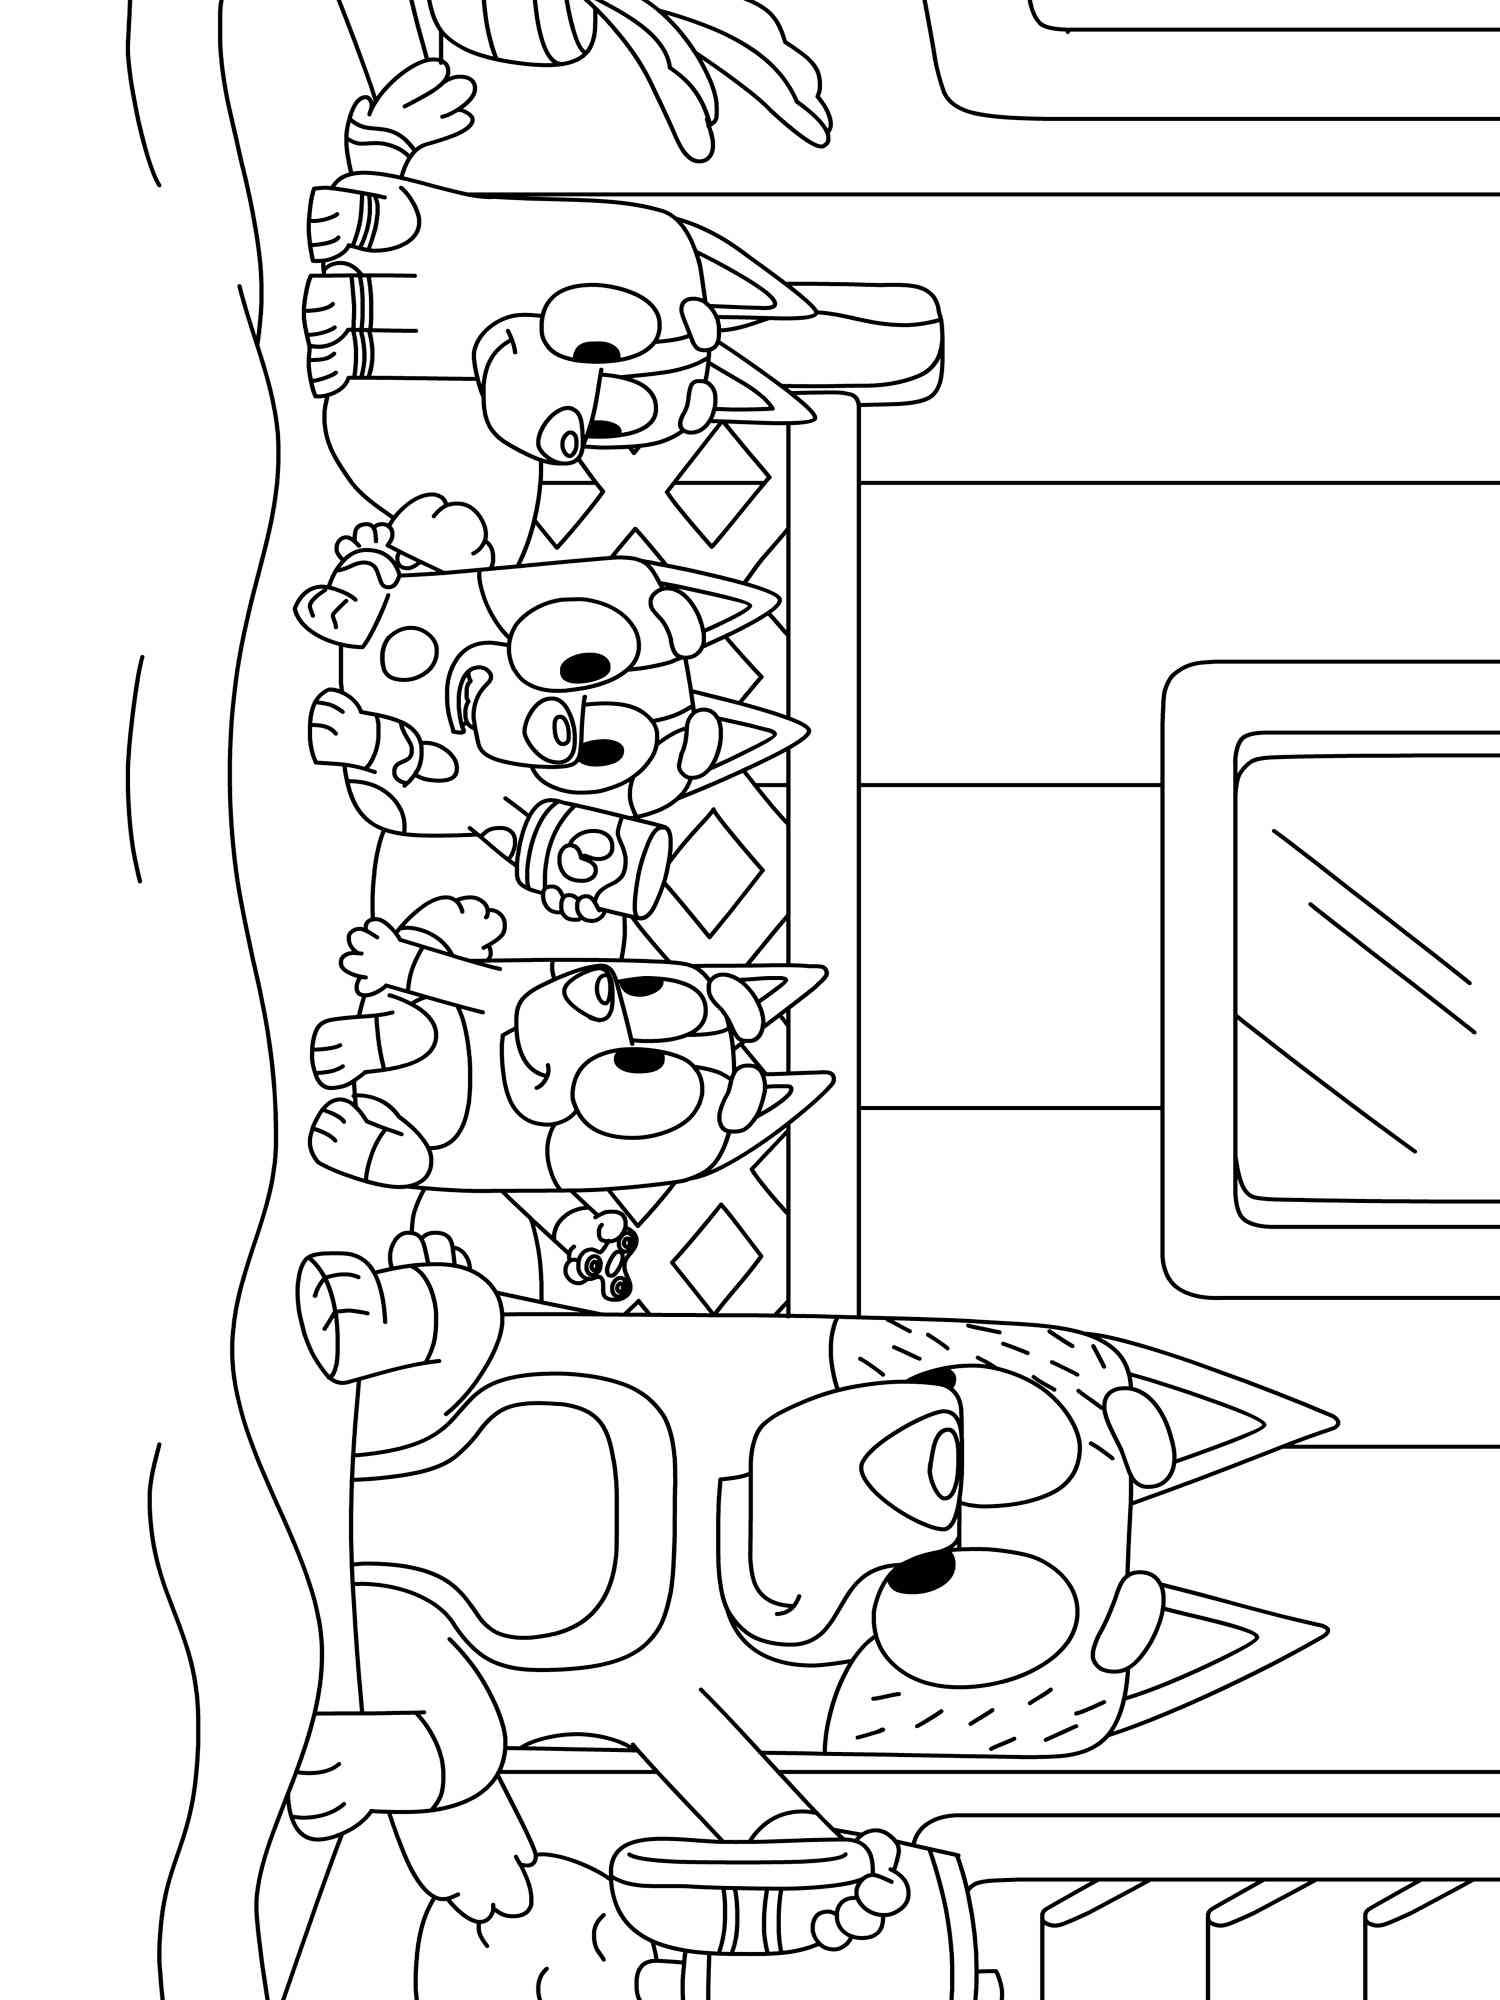 Bluey 2 coloring page